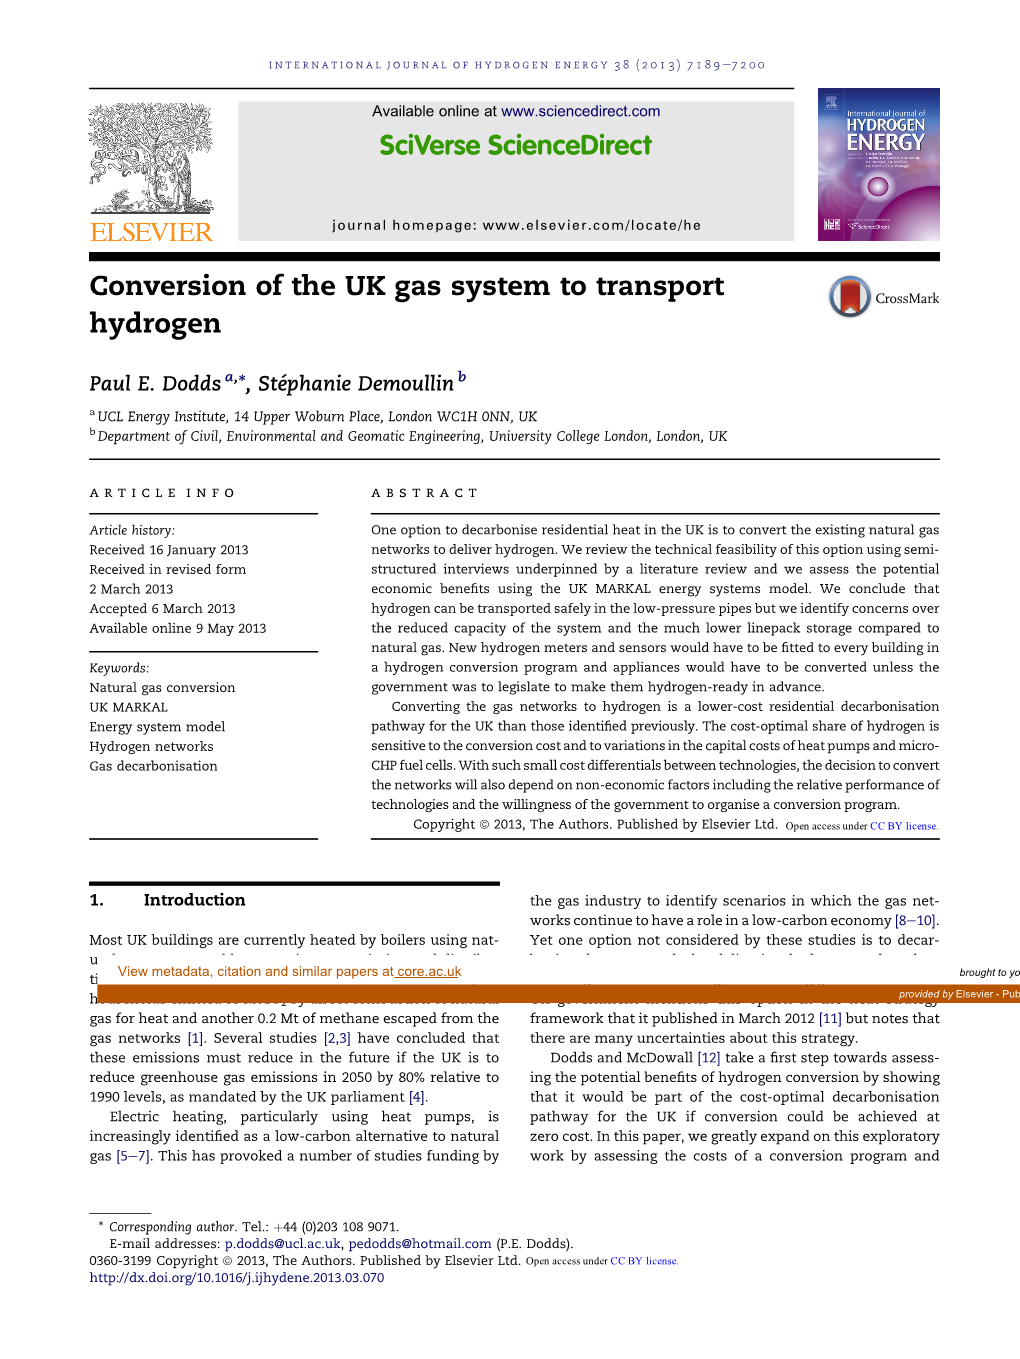 Conversion of the UK Gas System to Transport Hydrogen